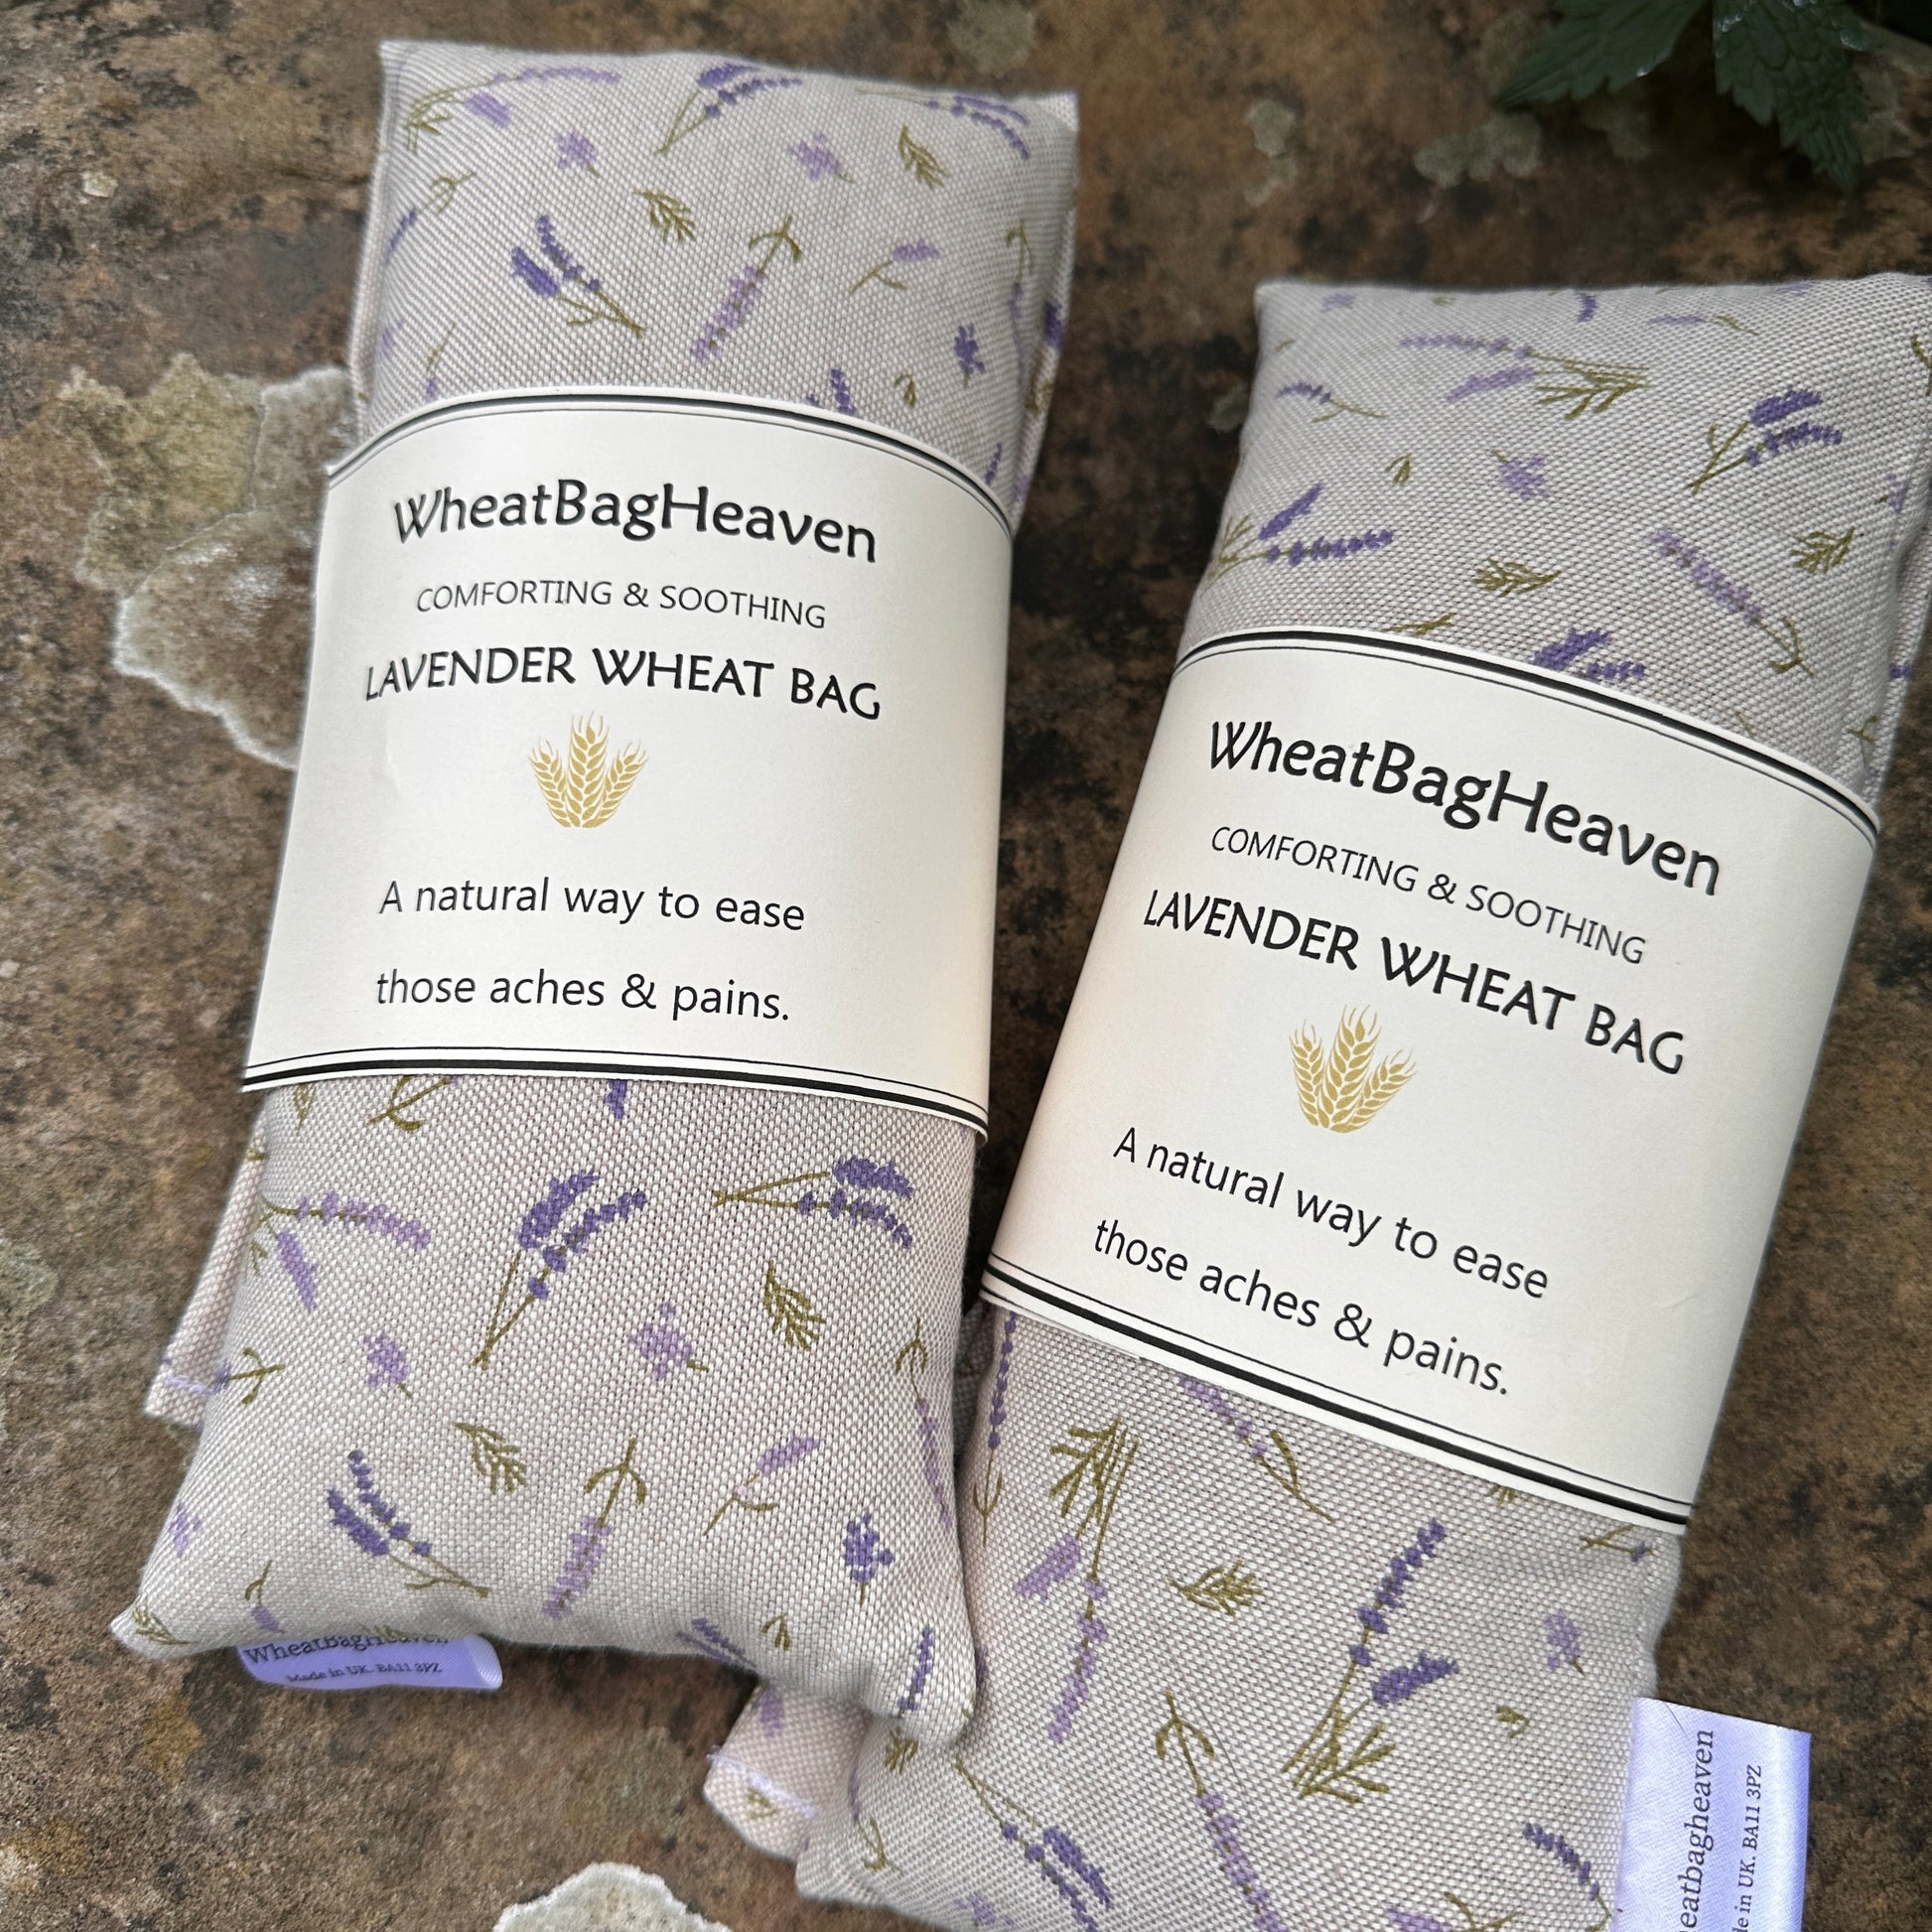 Two lavender scented eye pillows filled with organic flax seed and lavender buds